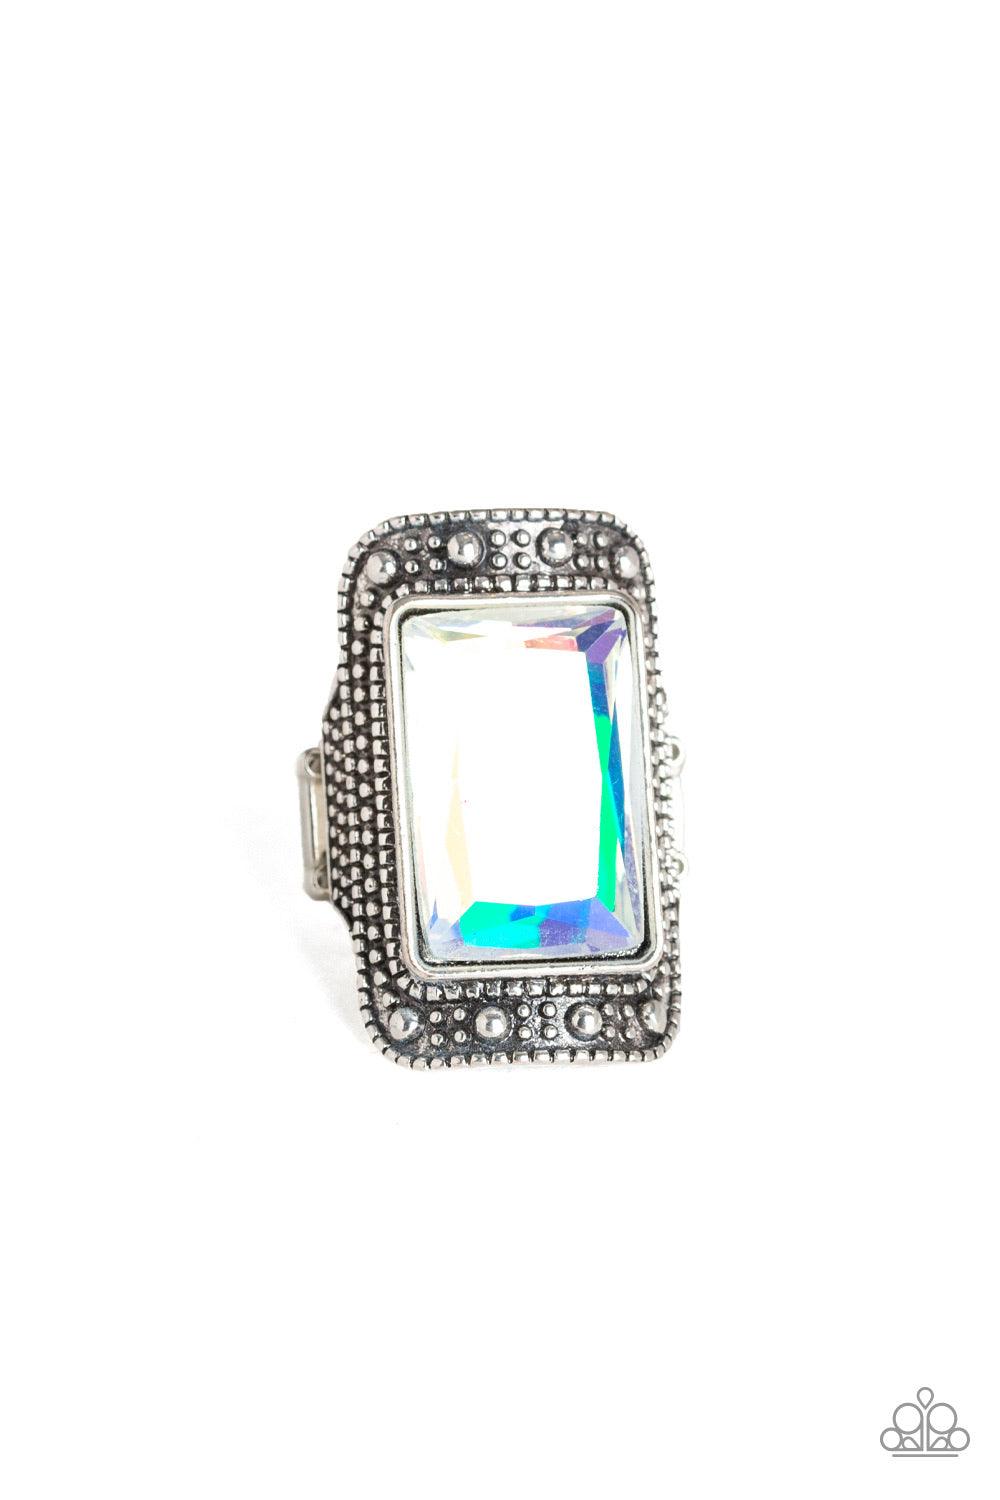 Paparazzi Accessories Very HEIR-descent ~White Featuring an iridescent oil spill finish, a dramatic emerald-cut gem is pressed into the center of a studded silver frame for a jaw-dropping look. Features a stretchy band for a flexible fit.